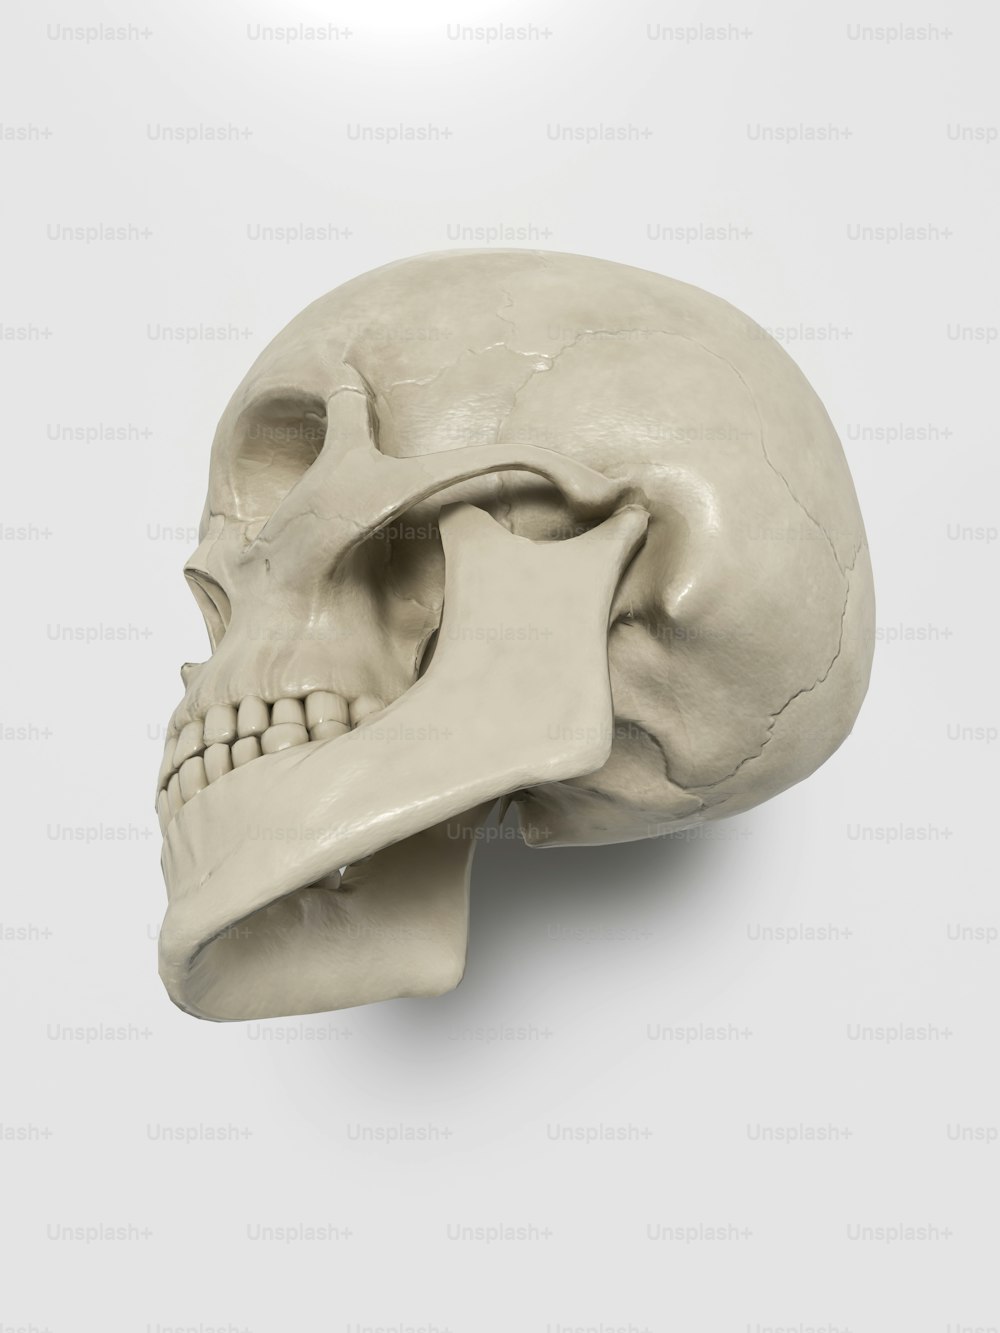 a model of a human skull on a white background